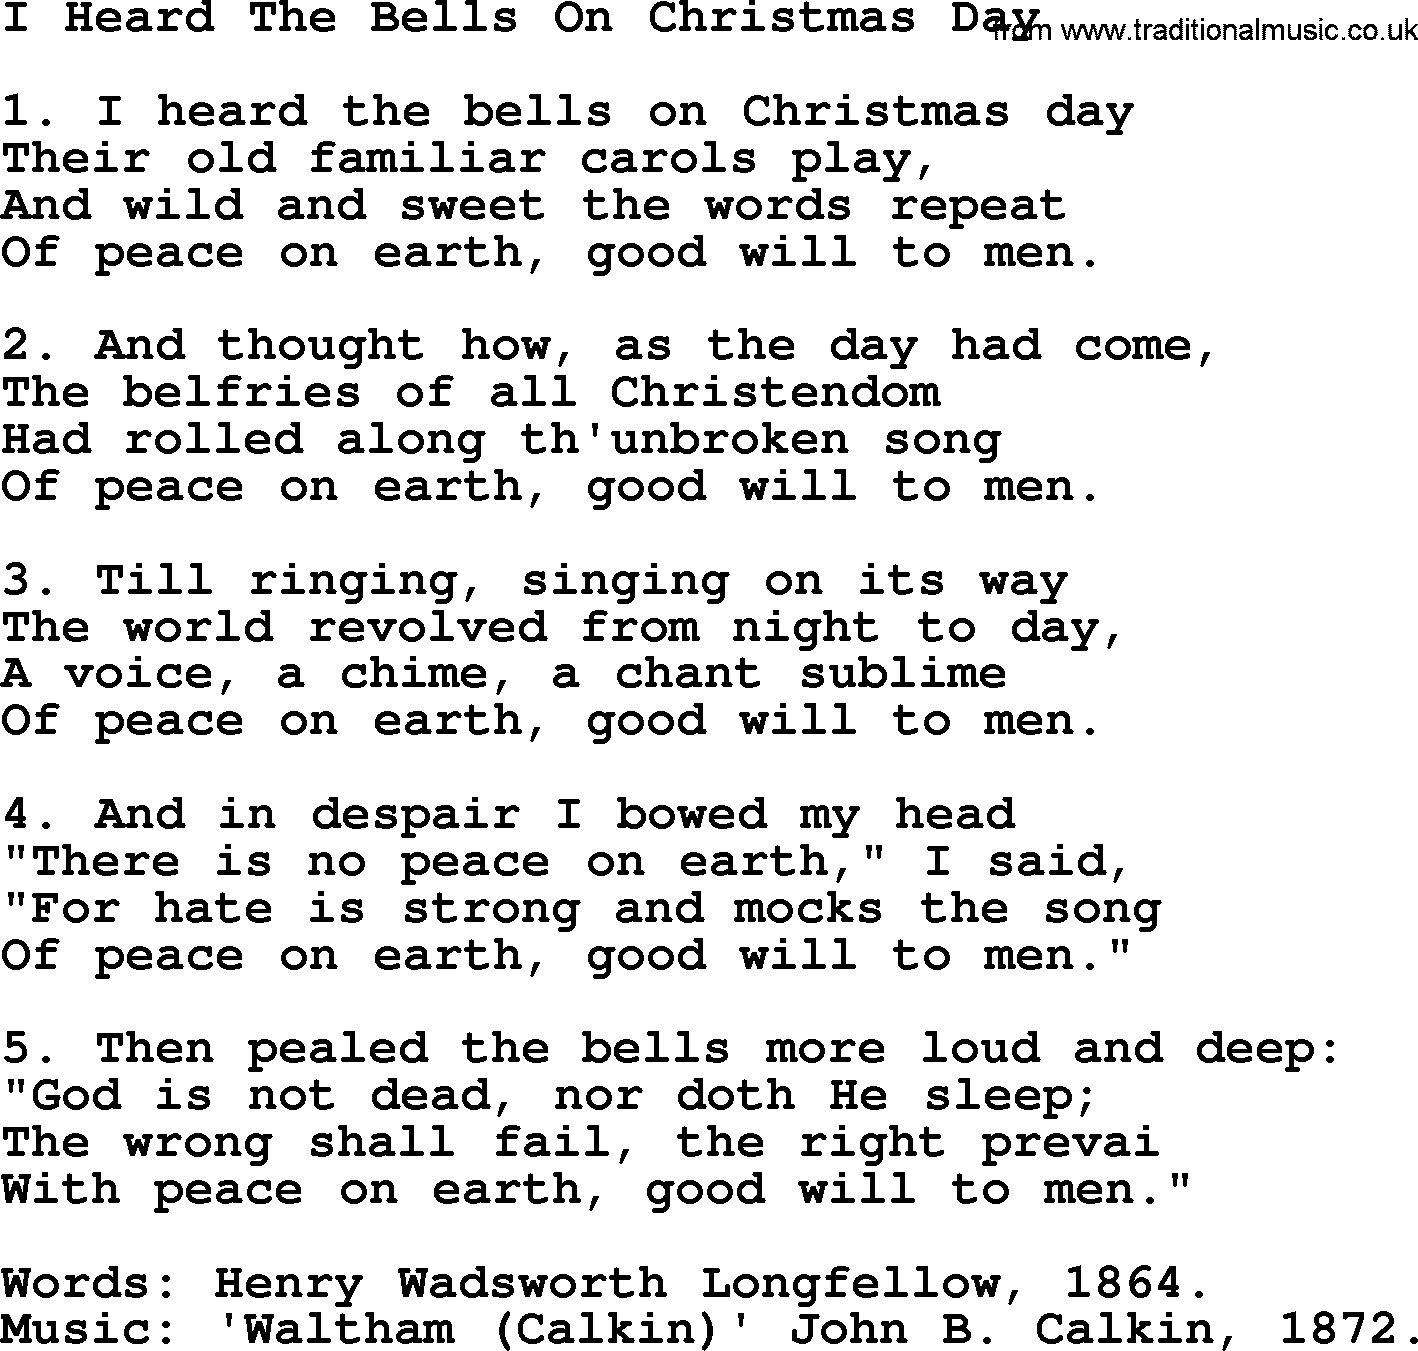 280 Christmas Hymns and songs with PowerPoints and PDF, title: I Heard The Bells On Christmas Day, lyrics, PPT and PDF